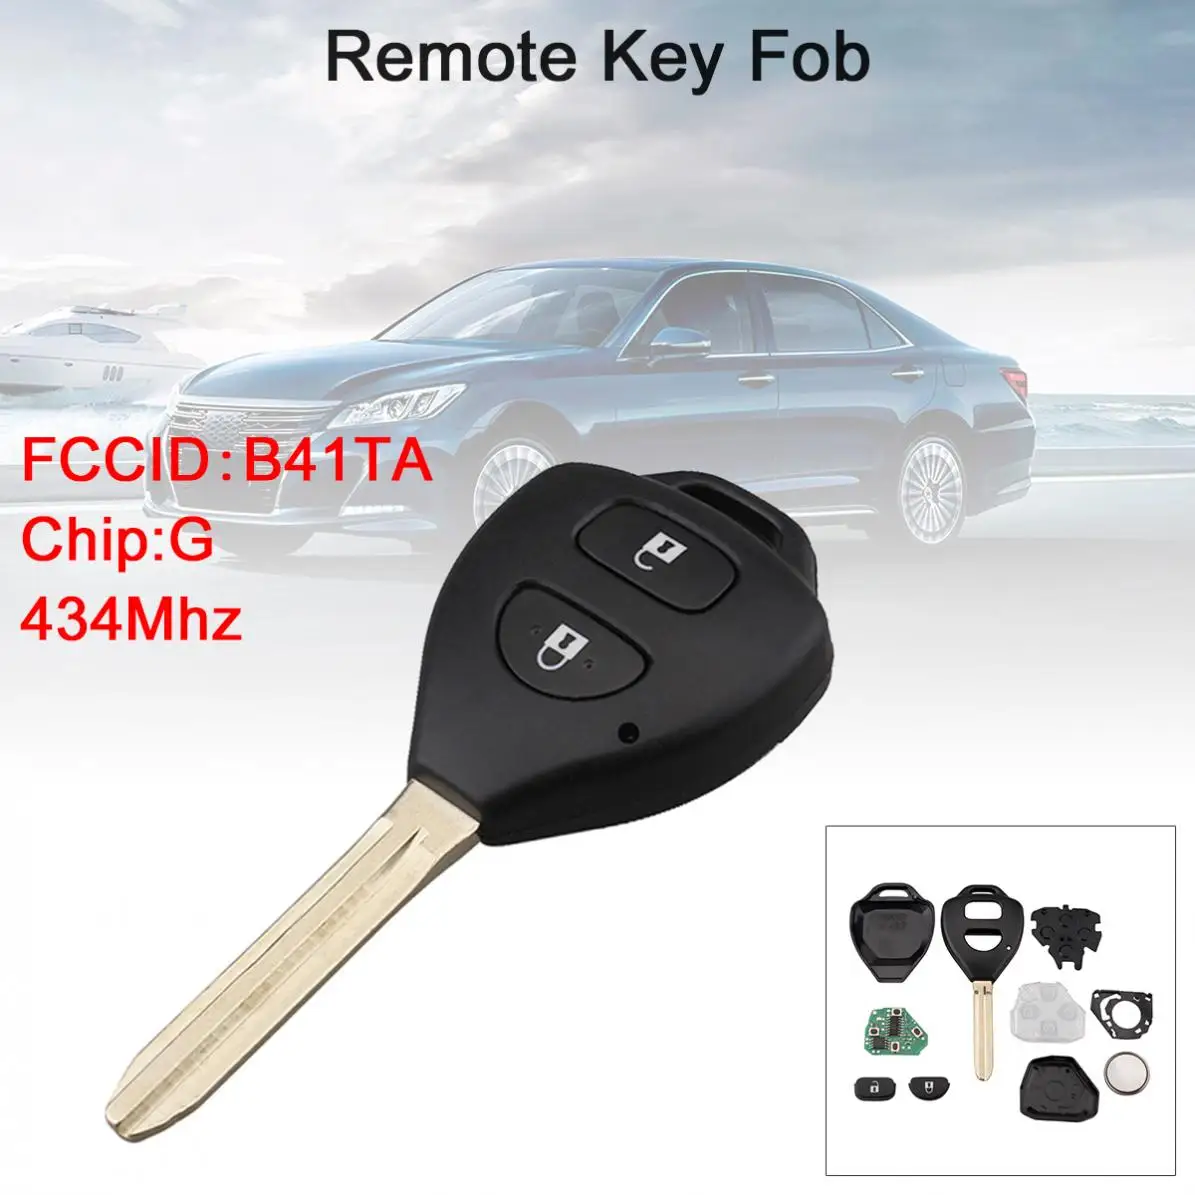 

434Mhz 2 Buttons Car Remote Key Fob with G Chip B41TA Fit for Toyota Hilux / Yaris 2009-2015